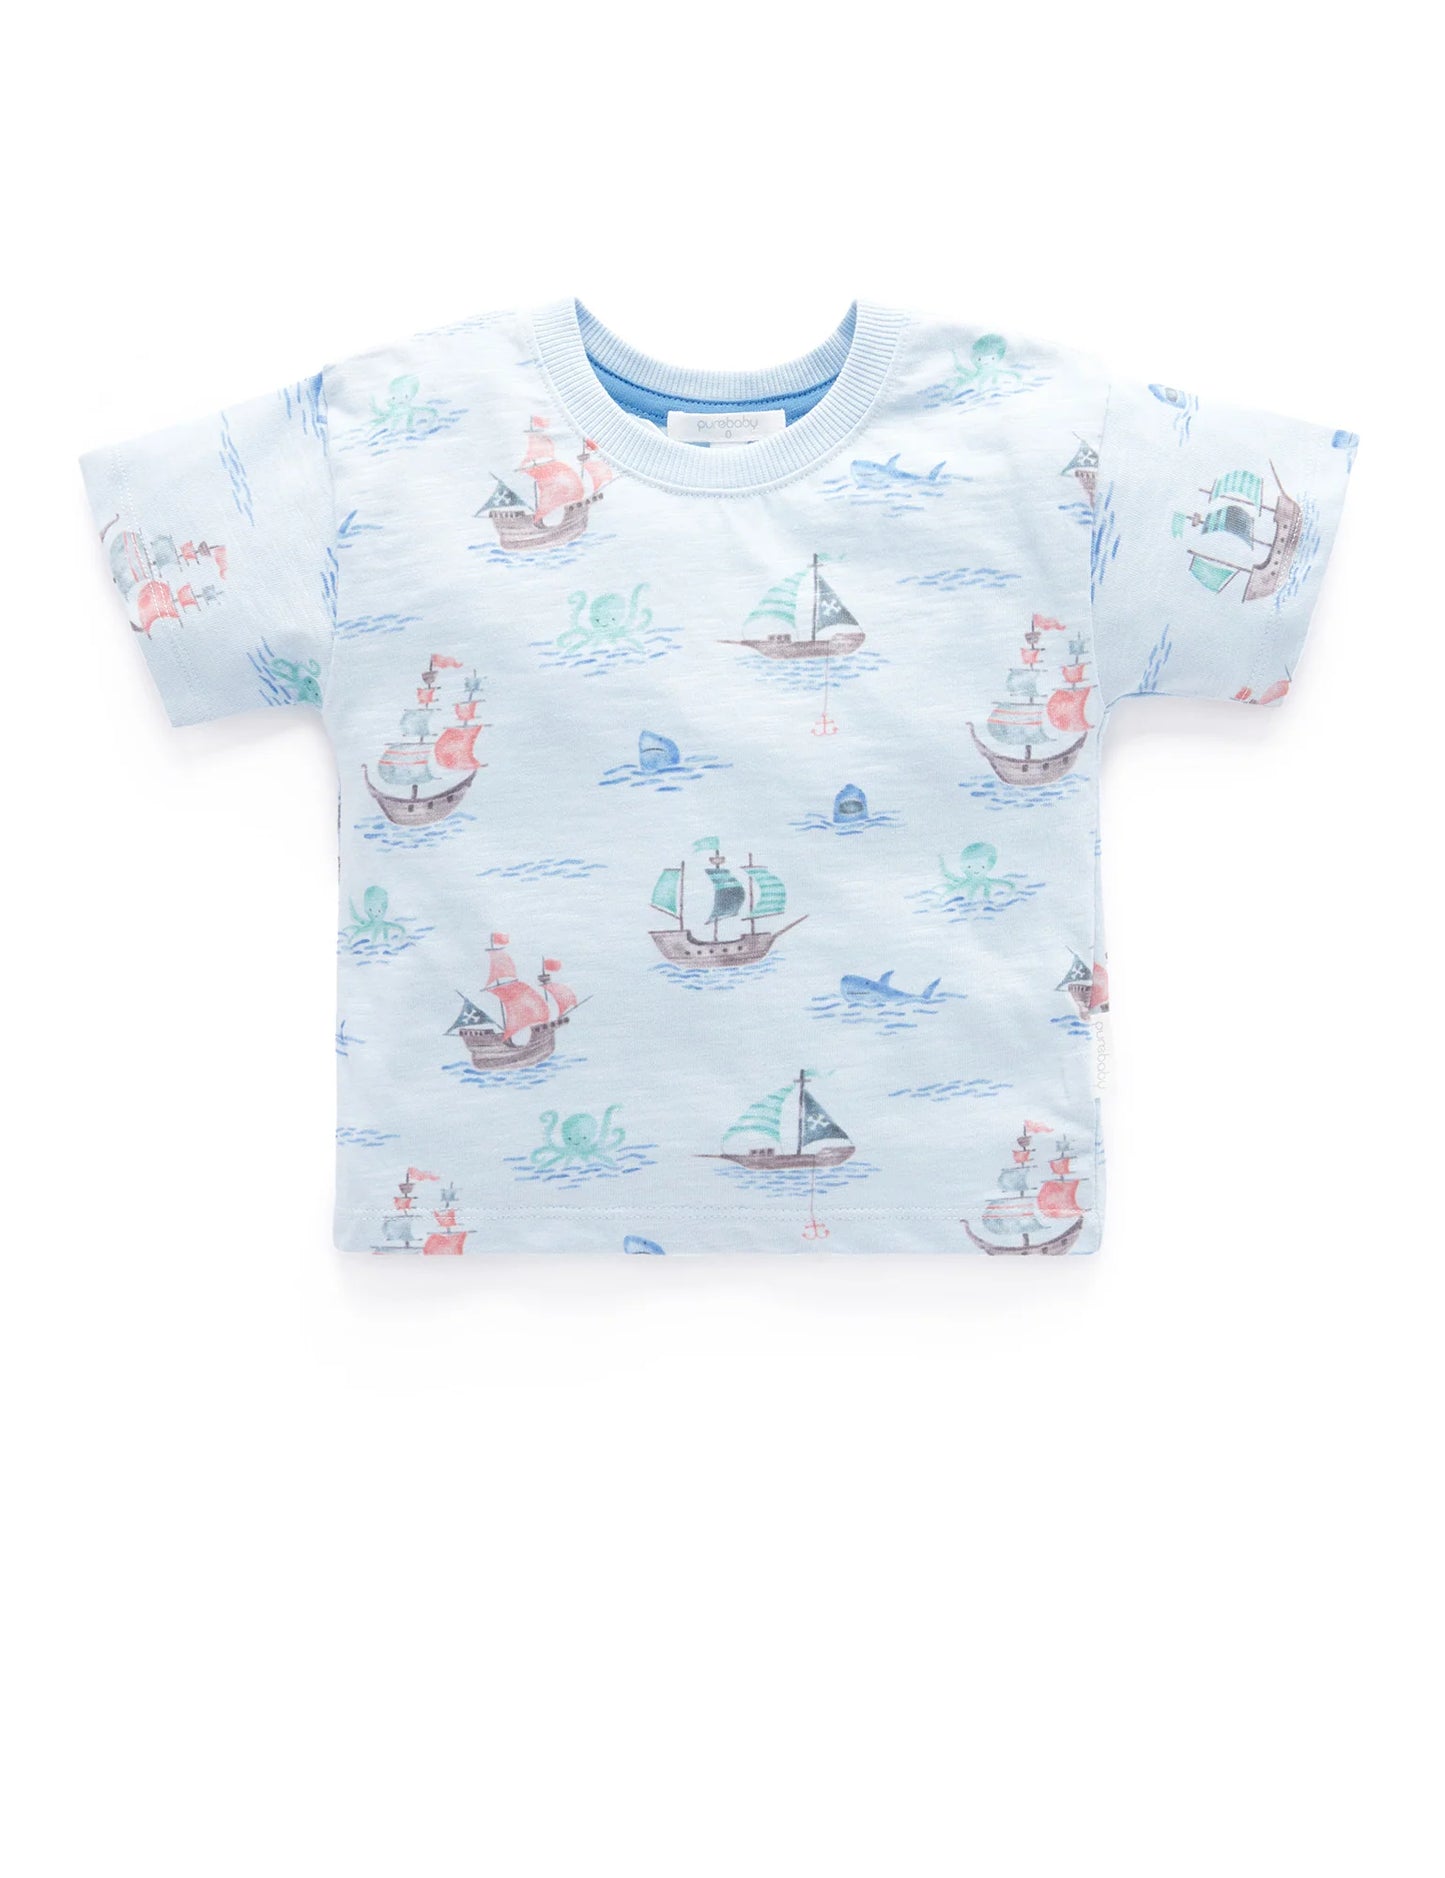 Pirate Ship Relaxed Tee